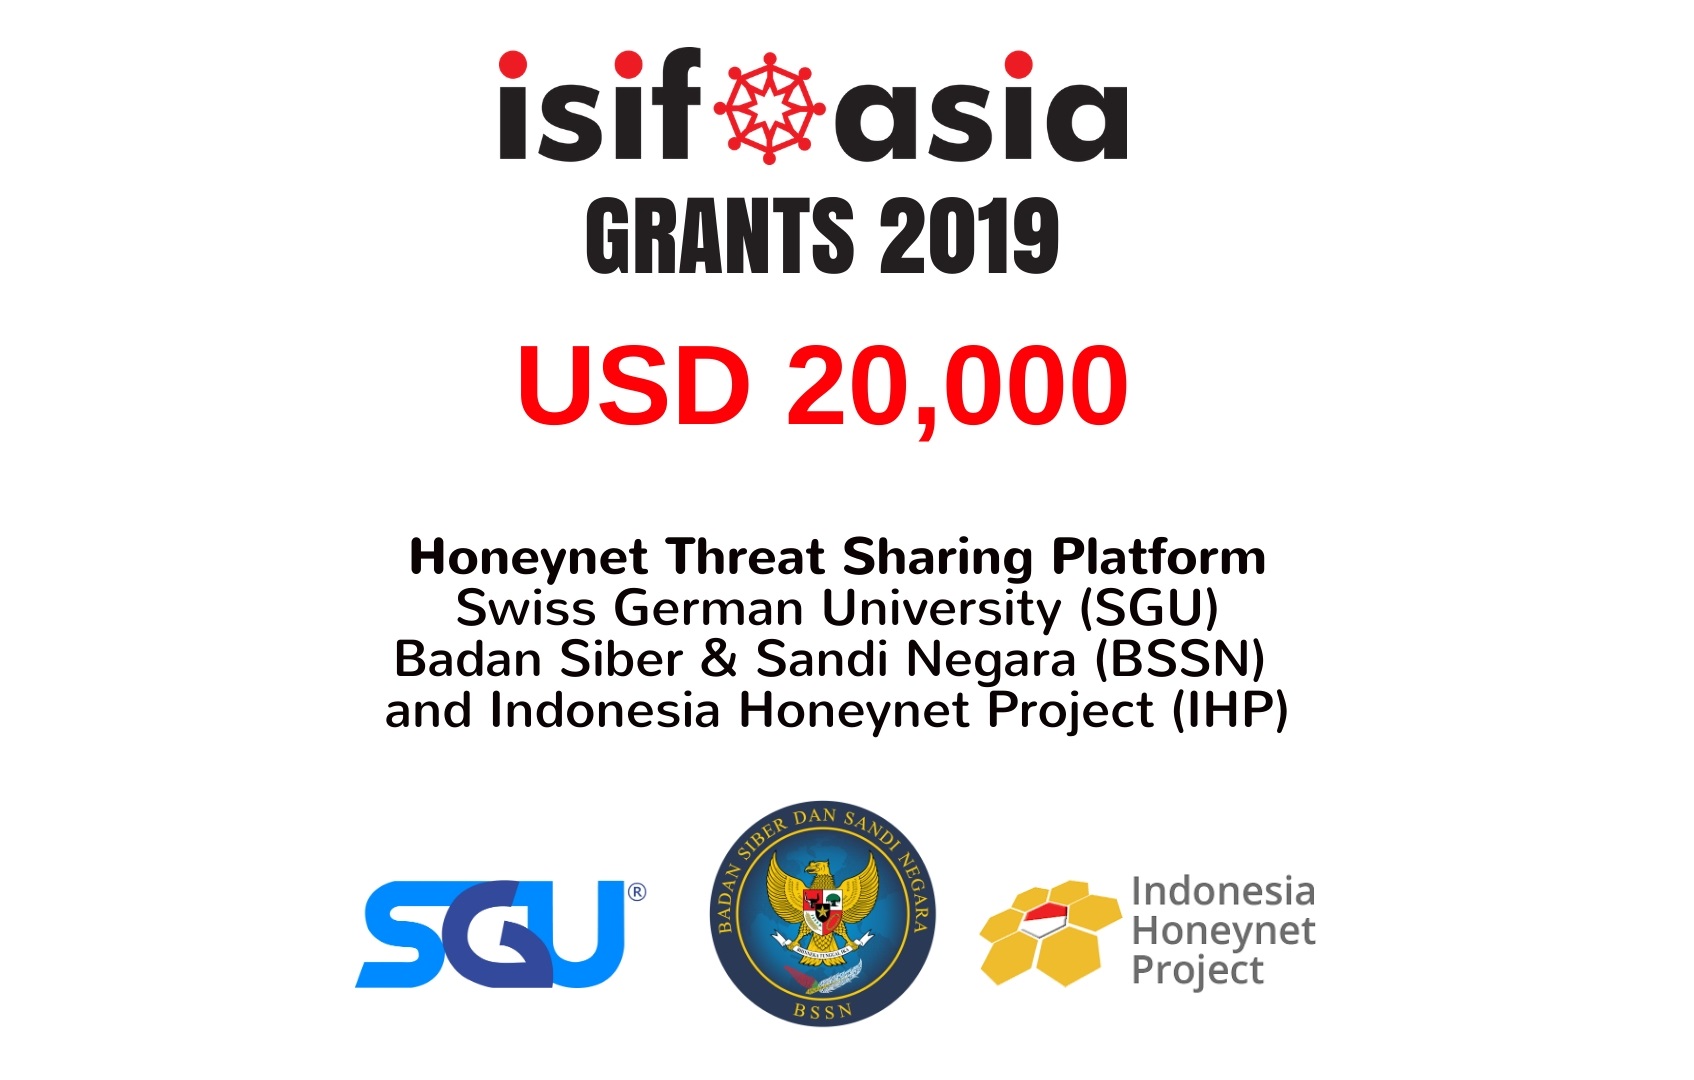 Swiss German University as One of ISIF Asia Grantees for 2019